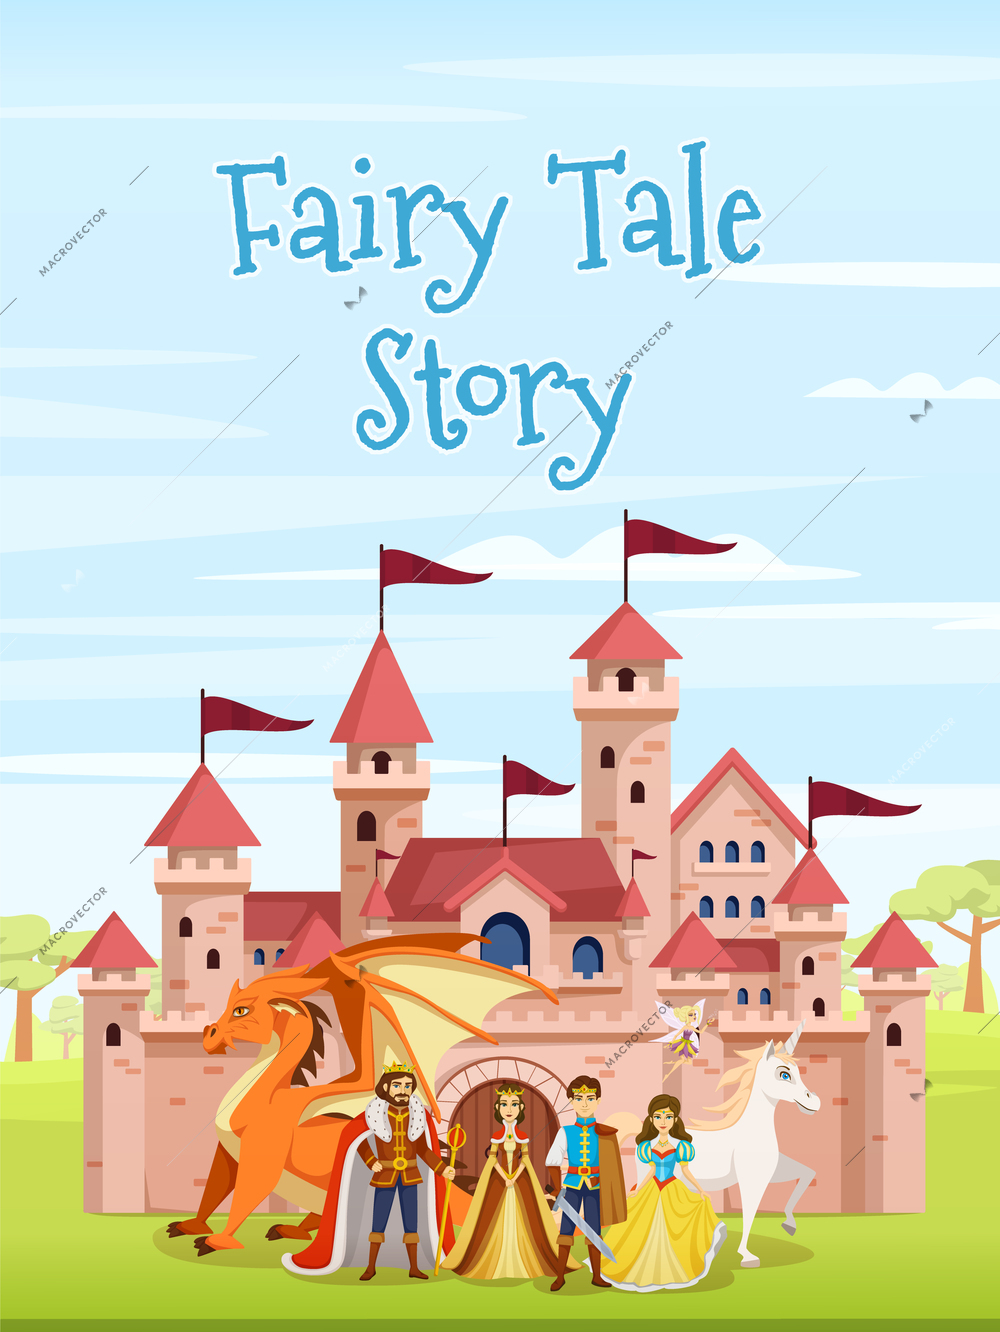 Cartoon fairy tale characters poster with fairy tale story headline and a large castle in the center vector illustration